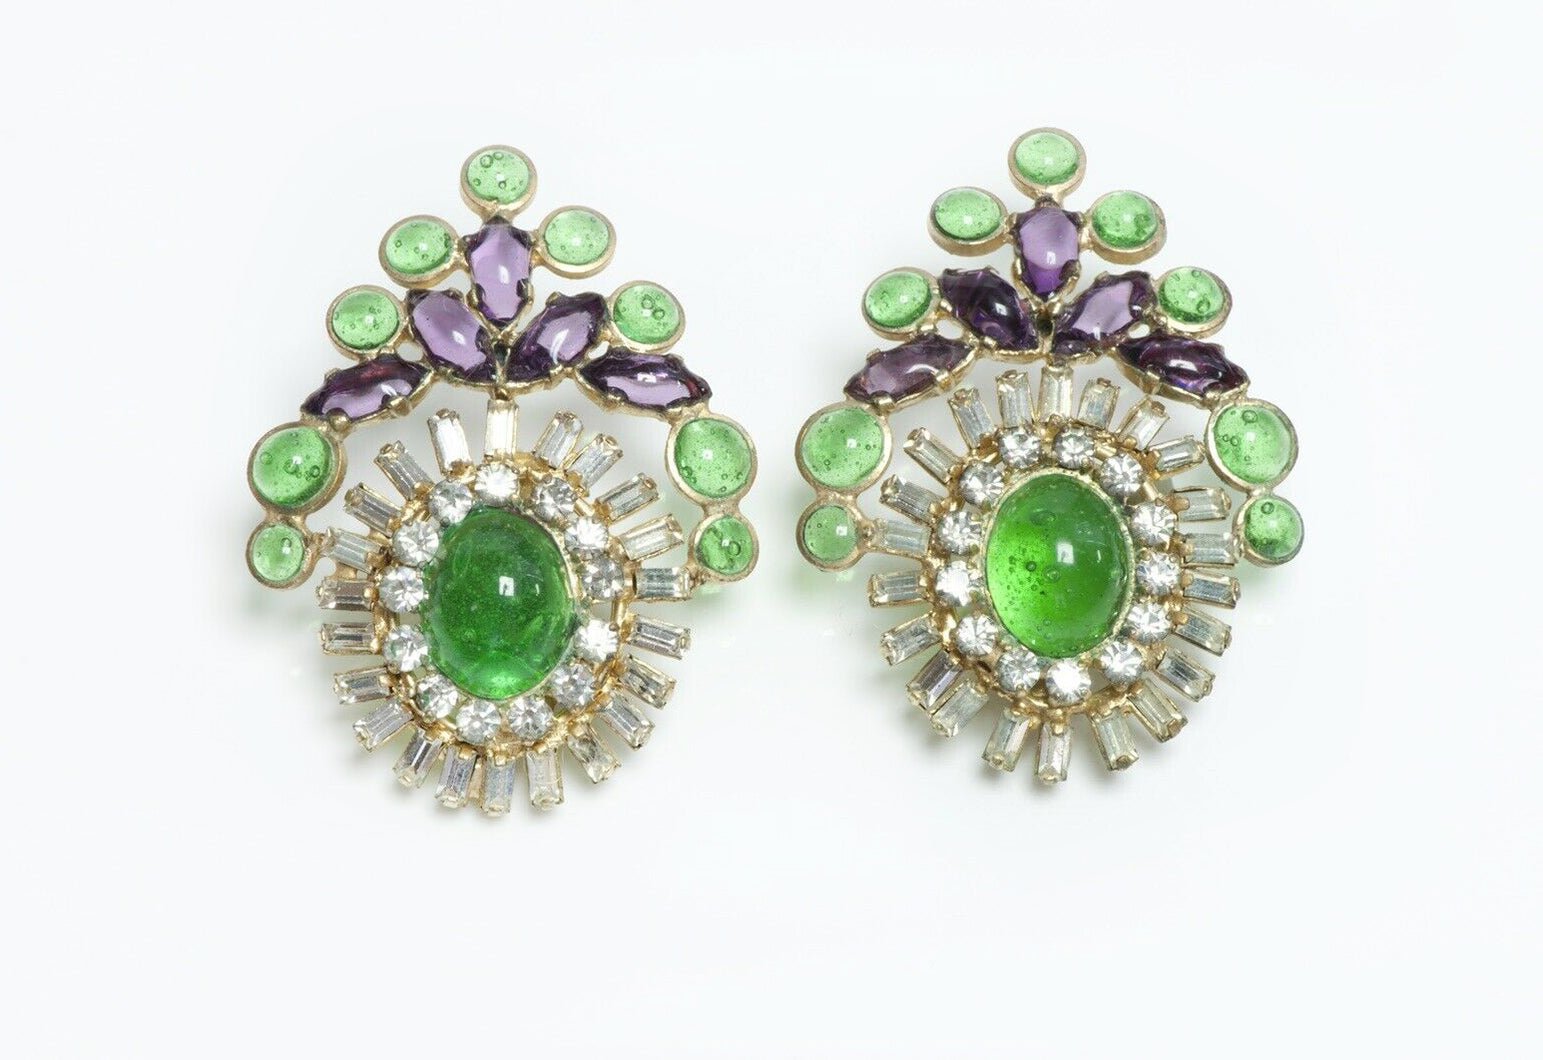 Coco CHANEL 1950’s Maison Gripoix Green Purple Cabochon Glass Crystal Earrings - DSF Antique Jewelry